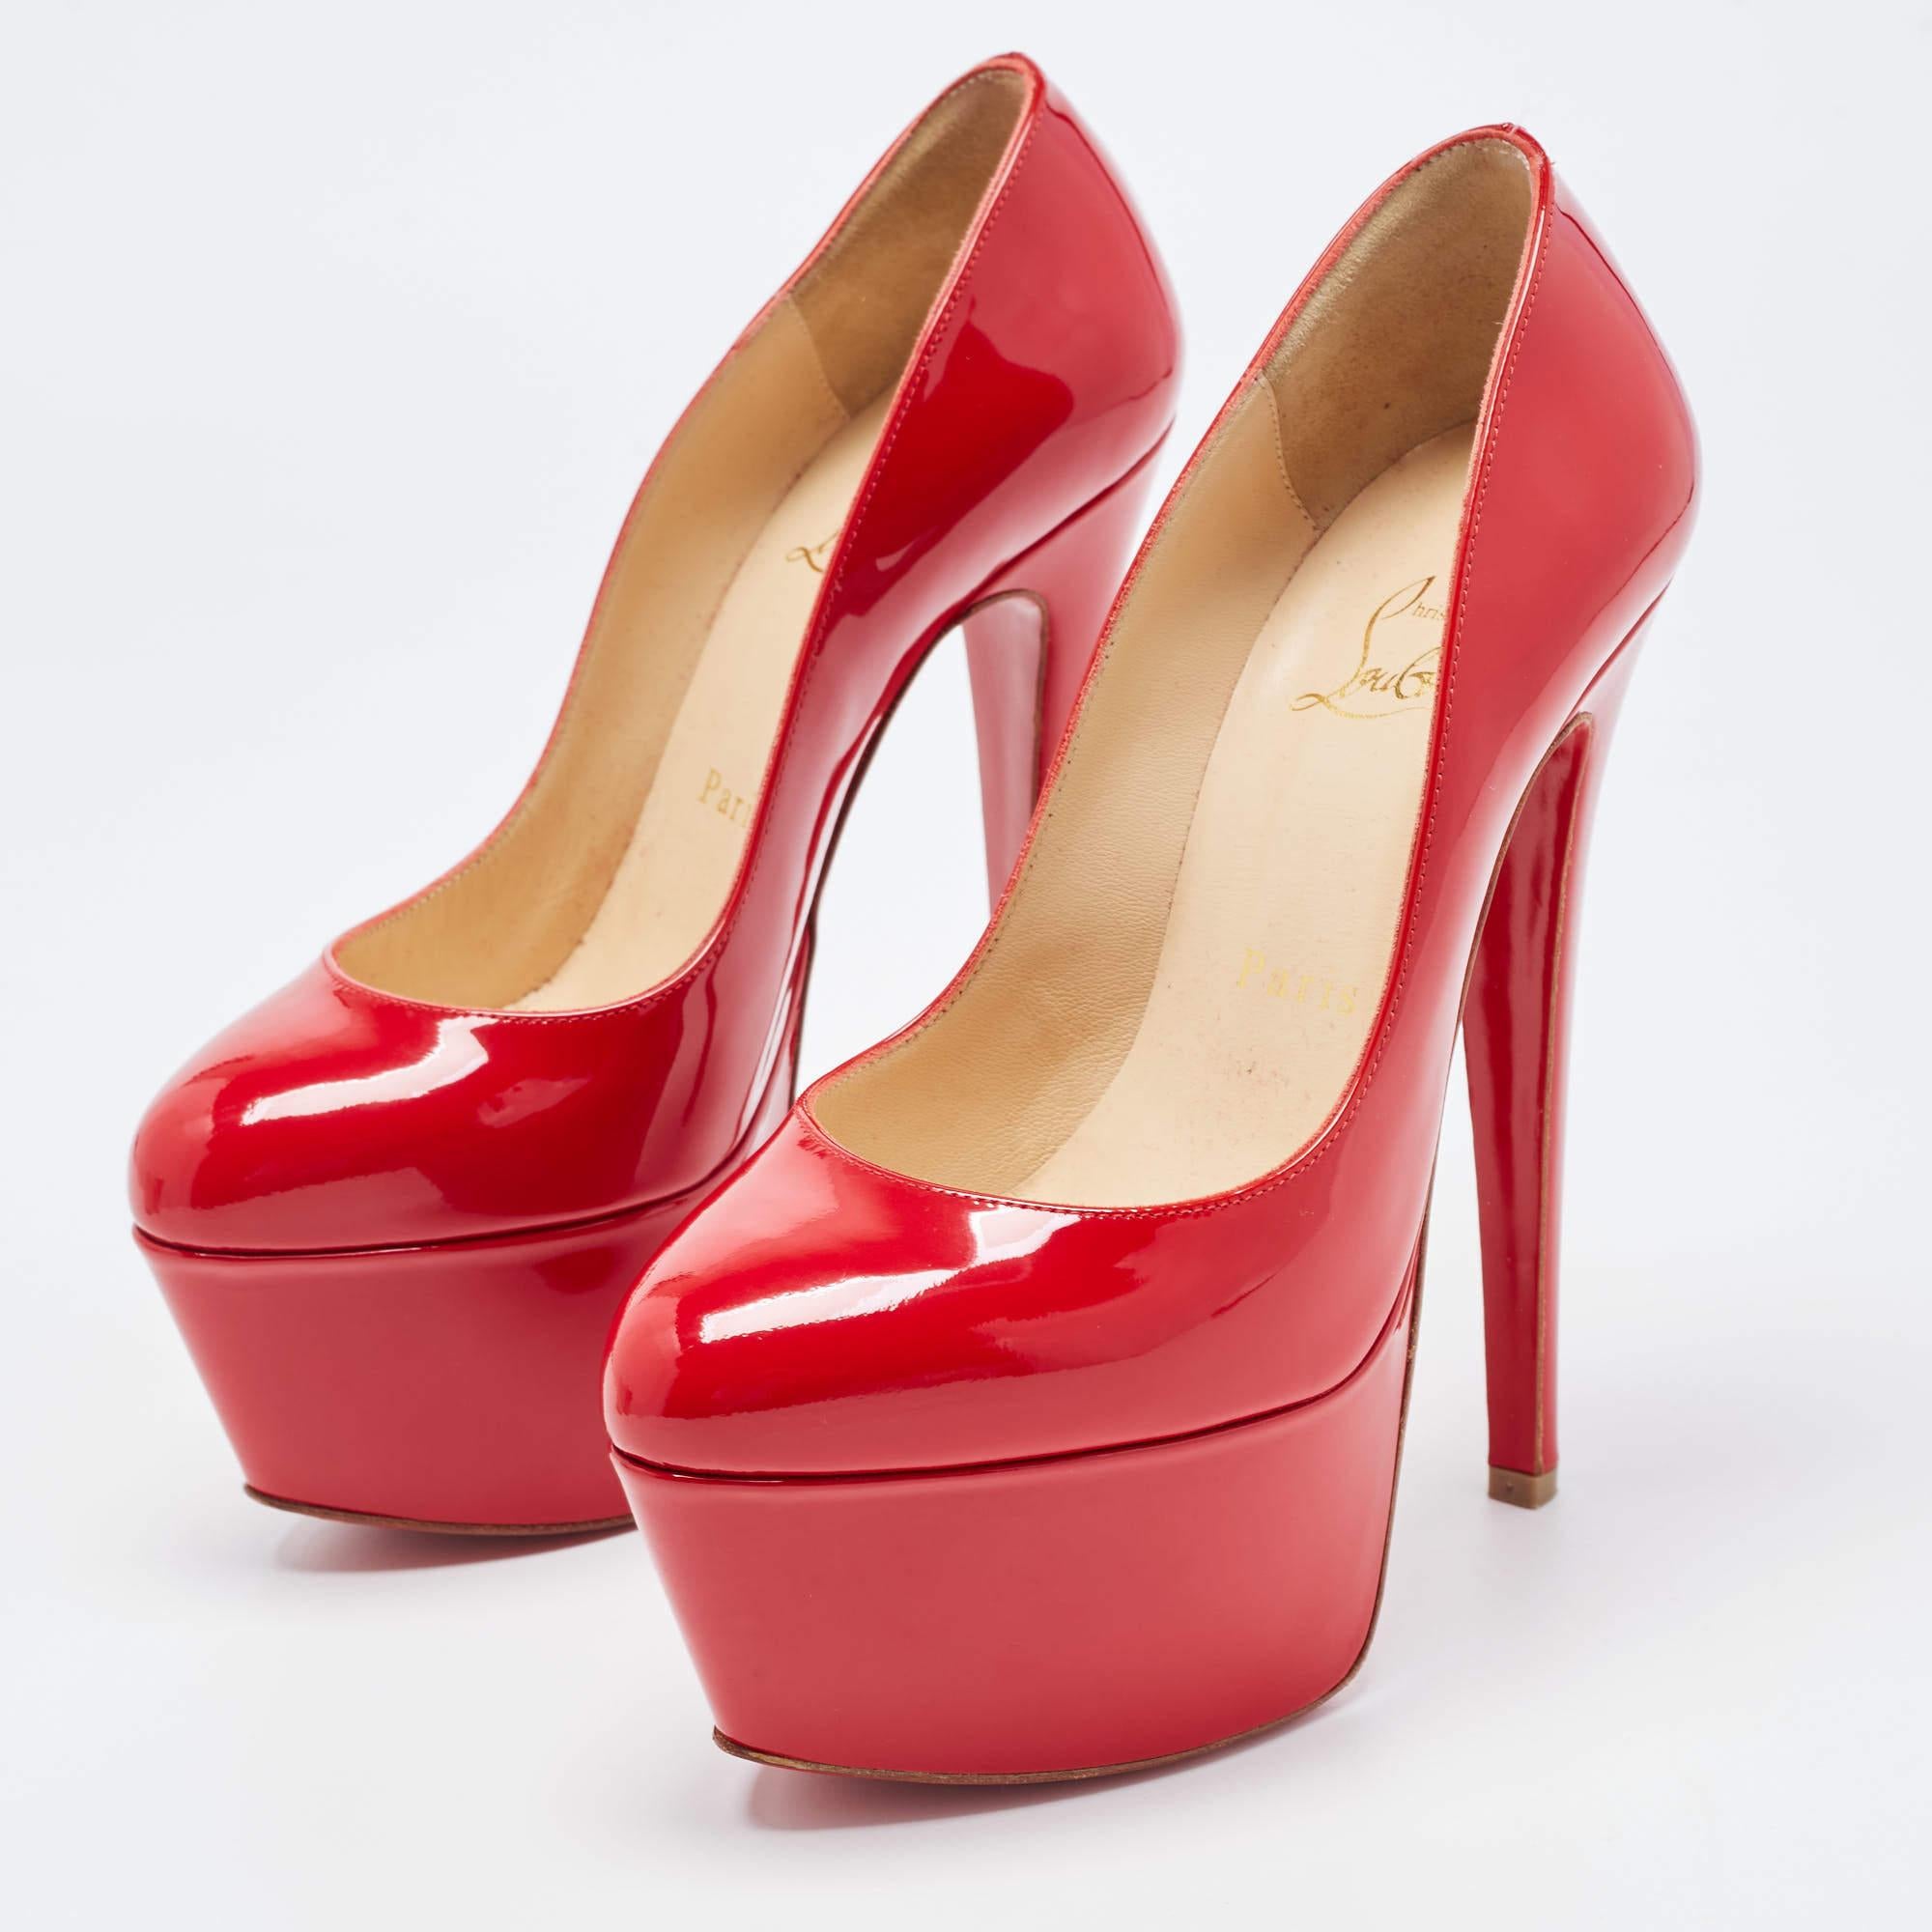 Christian Louboutin Red Patent Leather Victoria Platform Pumps Size 36 4